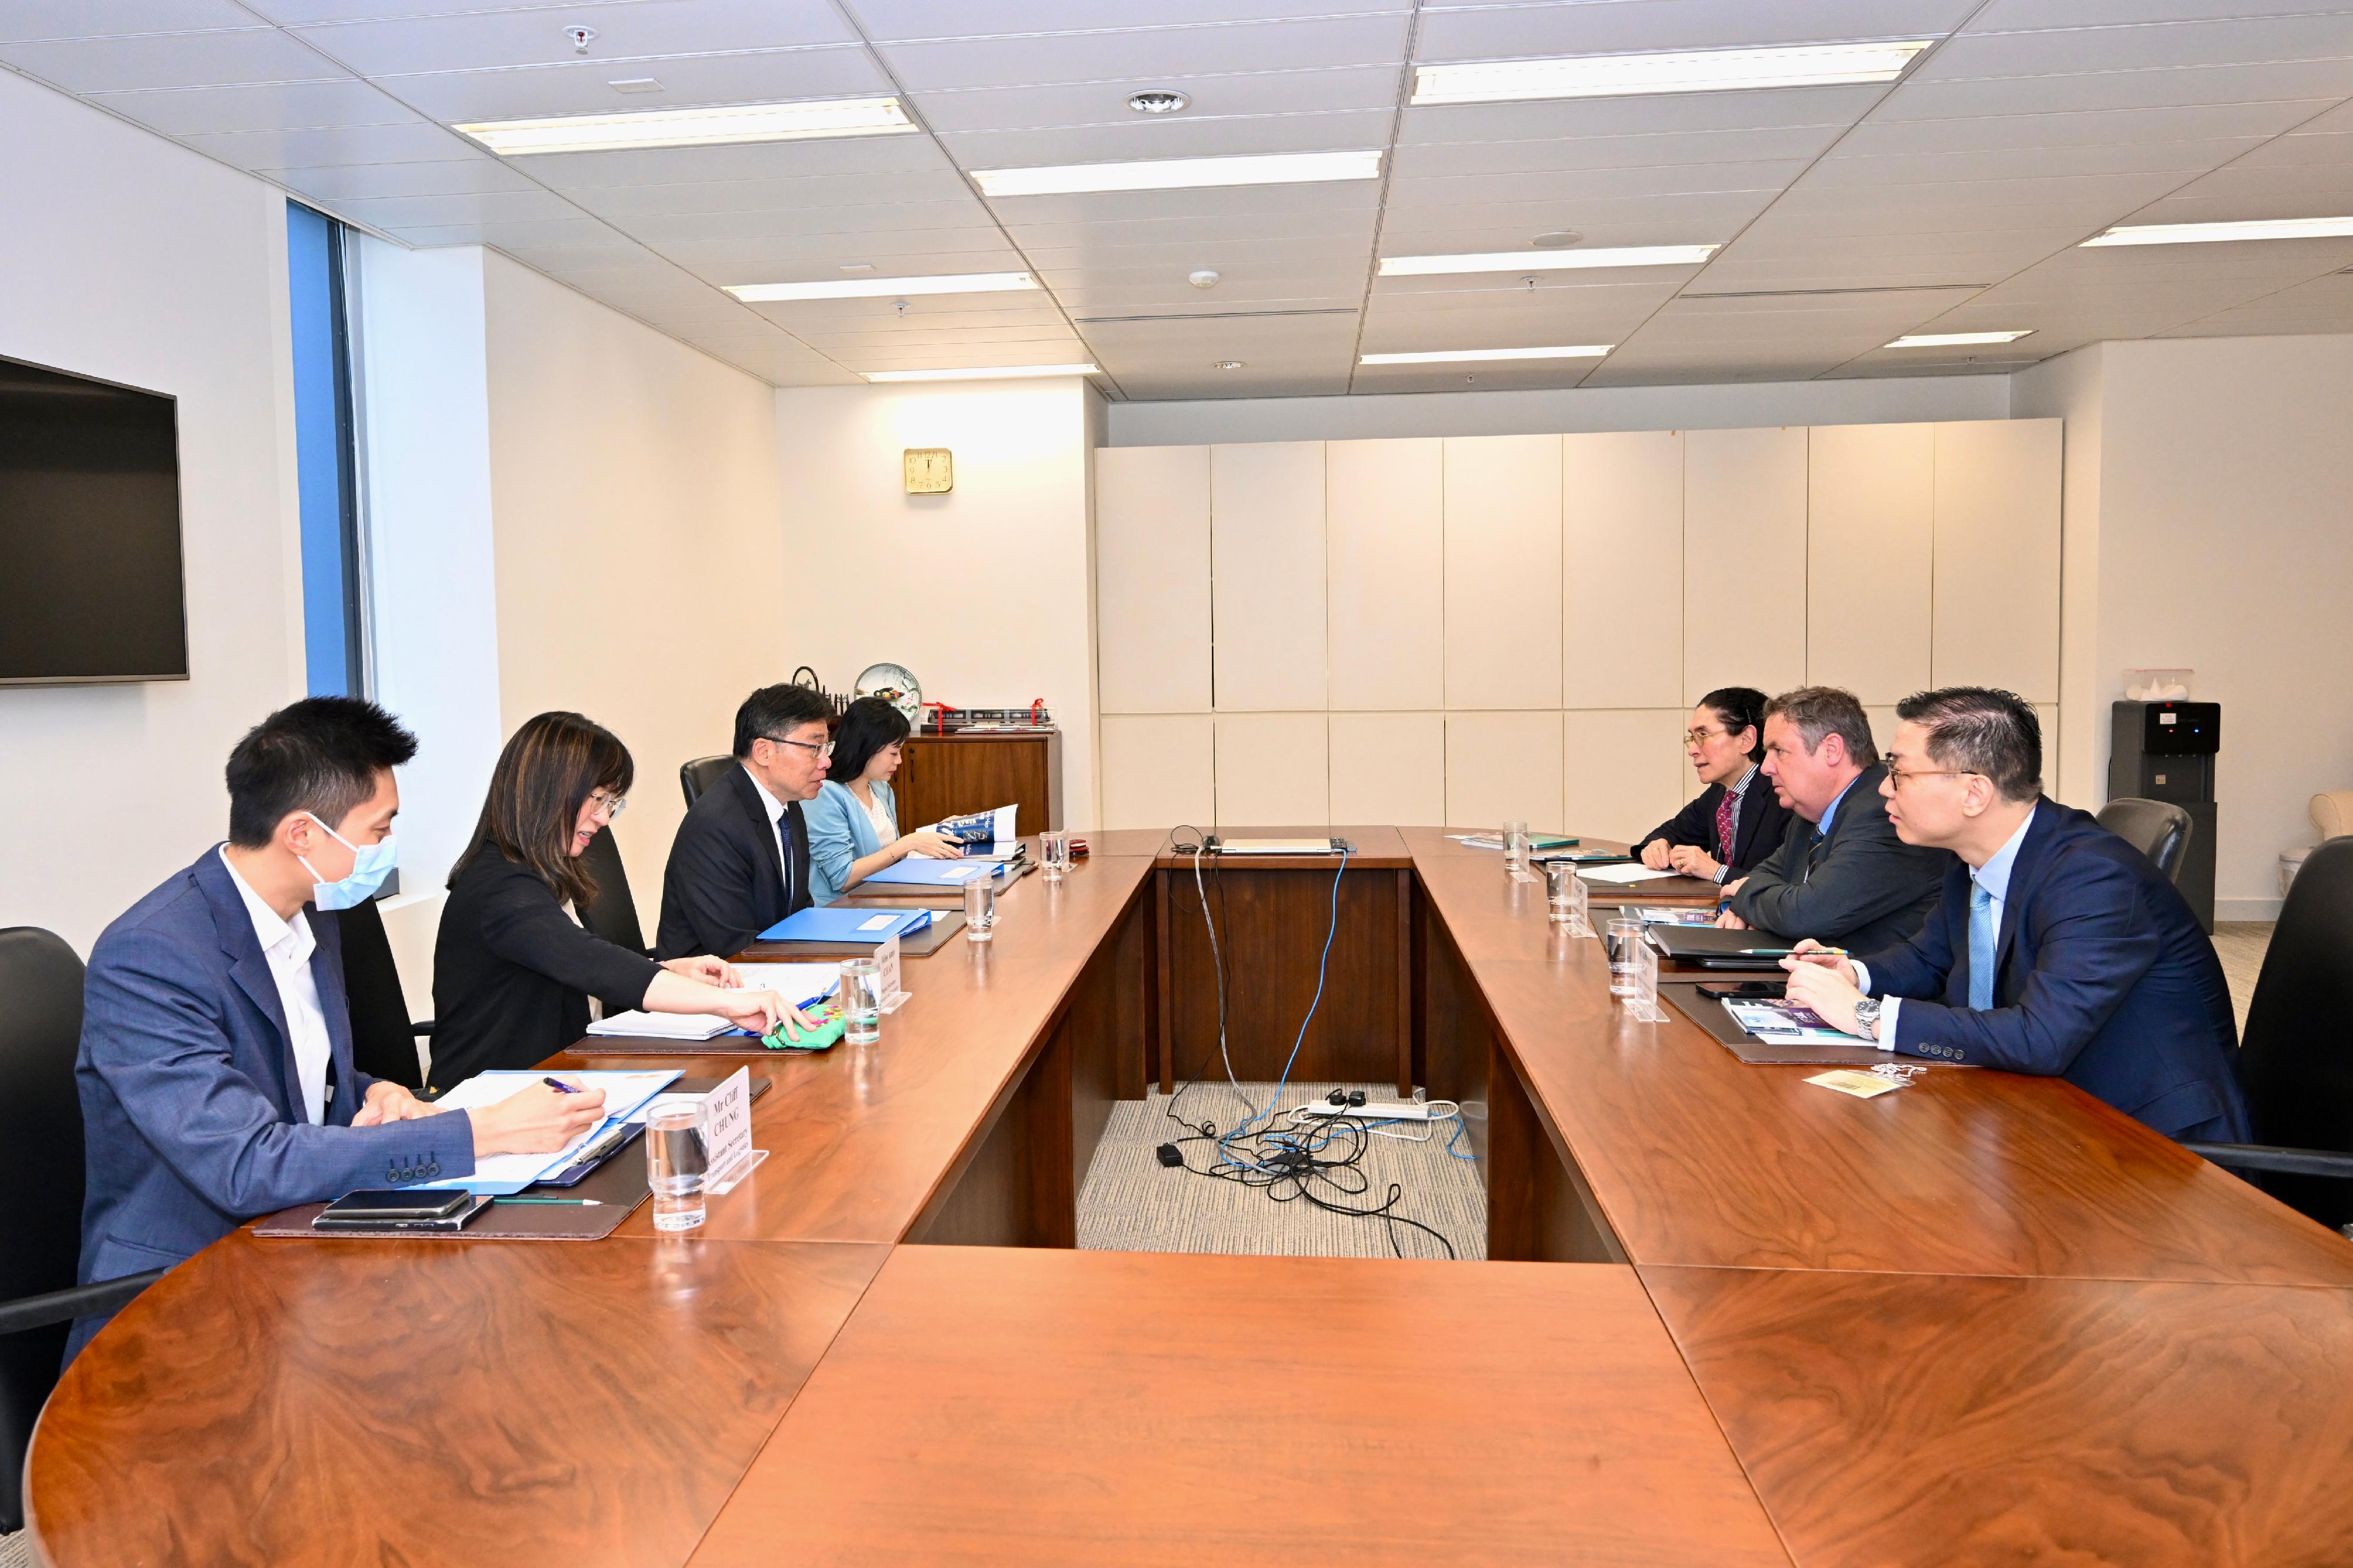 The Secretary for Transport and Logistics, Mr Lam Sai-hung (third left), and the Secretary General of the International Chamber of Shipping (ICS), Mr Guy Platten (second right), met today (May 28) to exchange views about the latest developments in the global maritime industry. Photo shows Mr Lam introducing to ICS representatives during the meeting the key strategies and action measures by the Hong Kong Special Administrative Region Government in reinforcing Hong Kong's position as the world's leading international maritime centre.